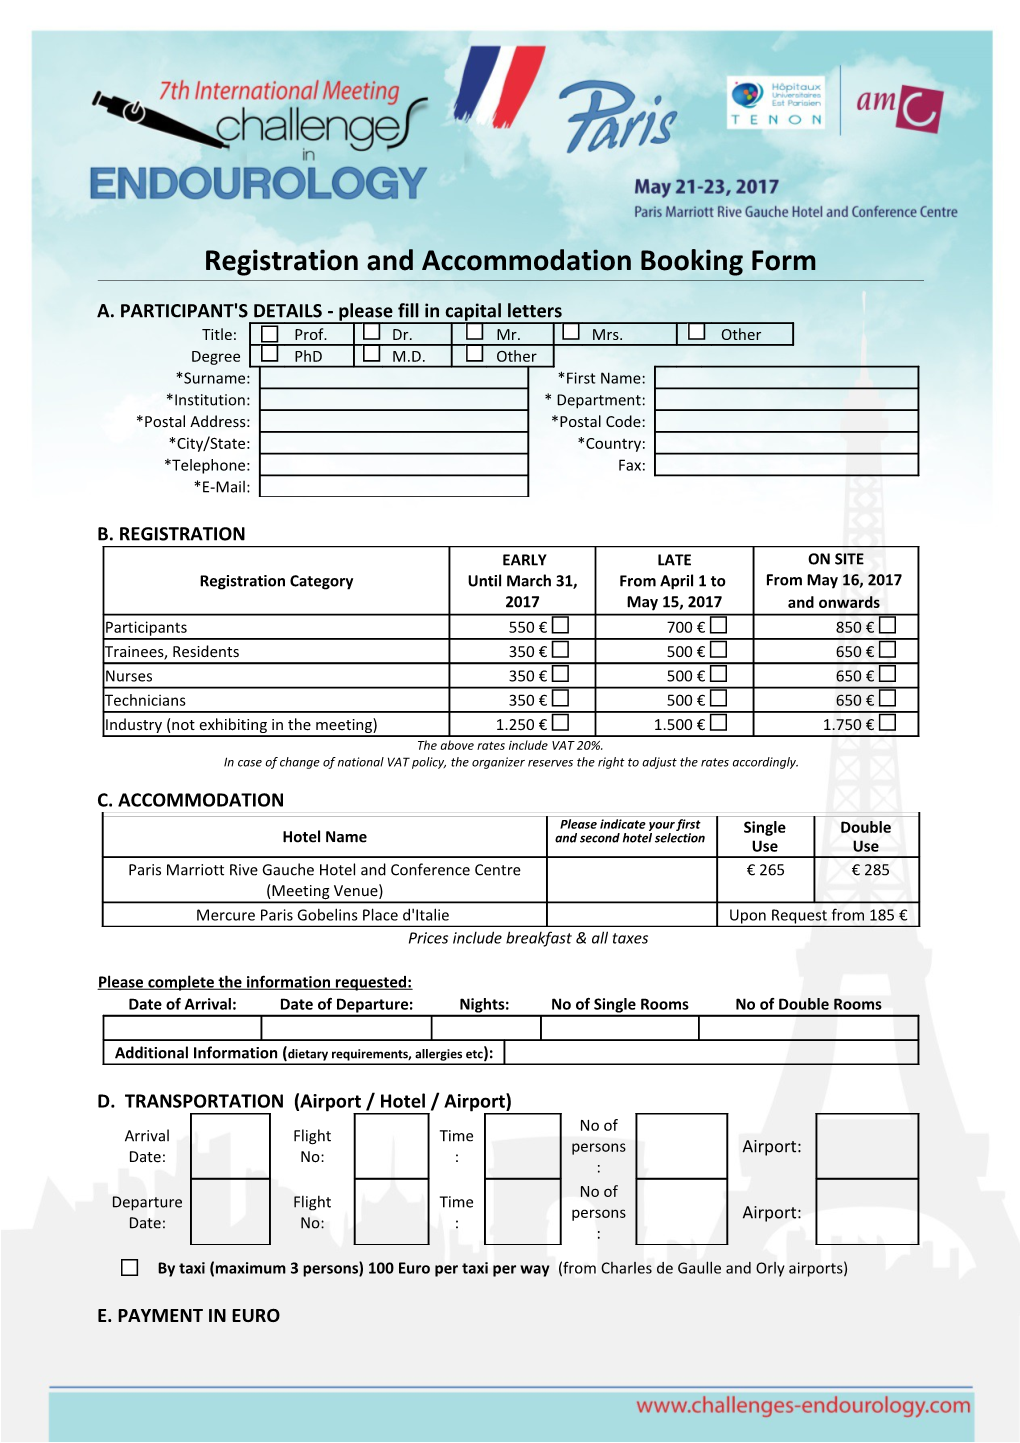 Registration and Accommodation Booking Form